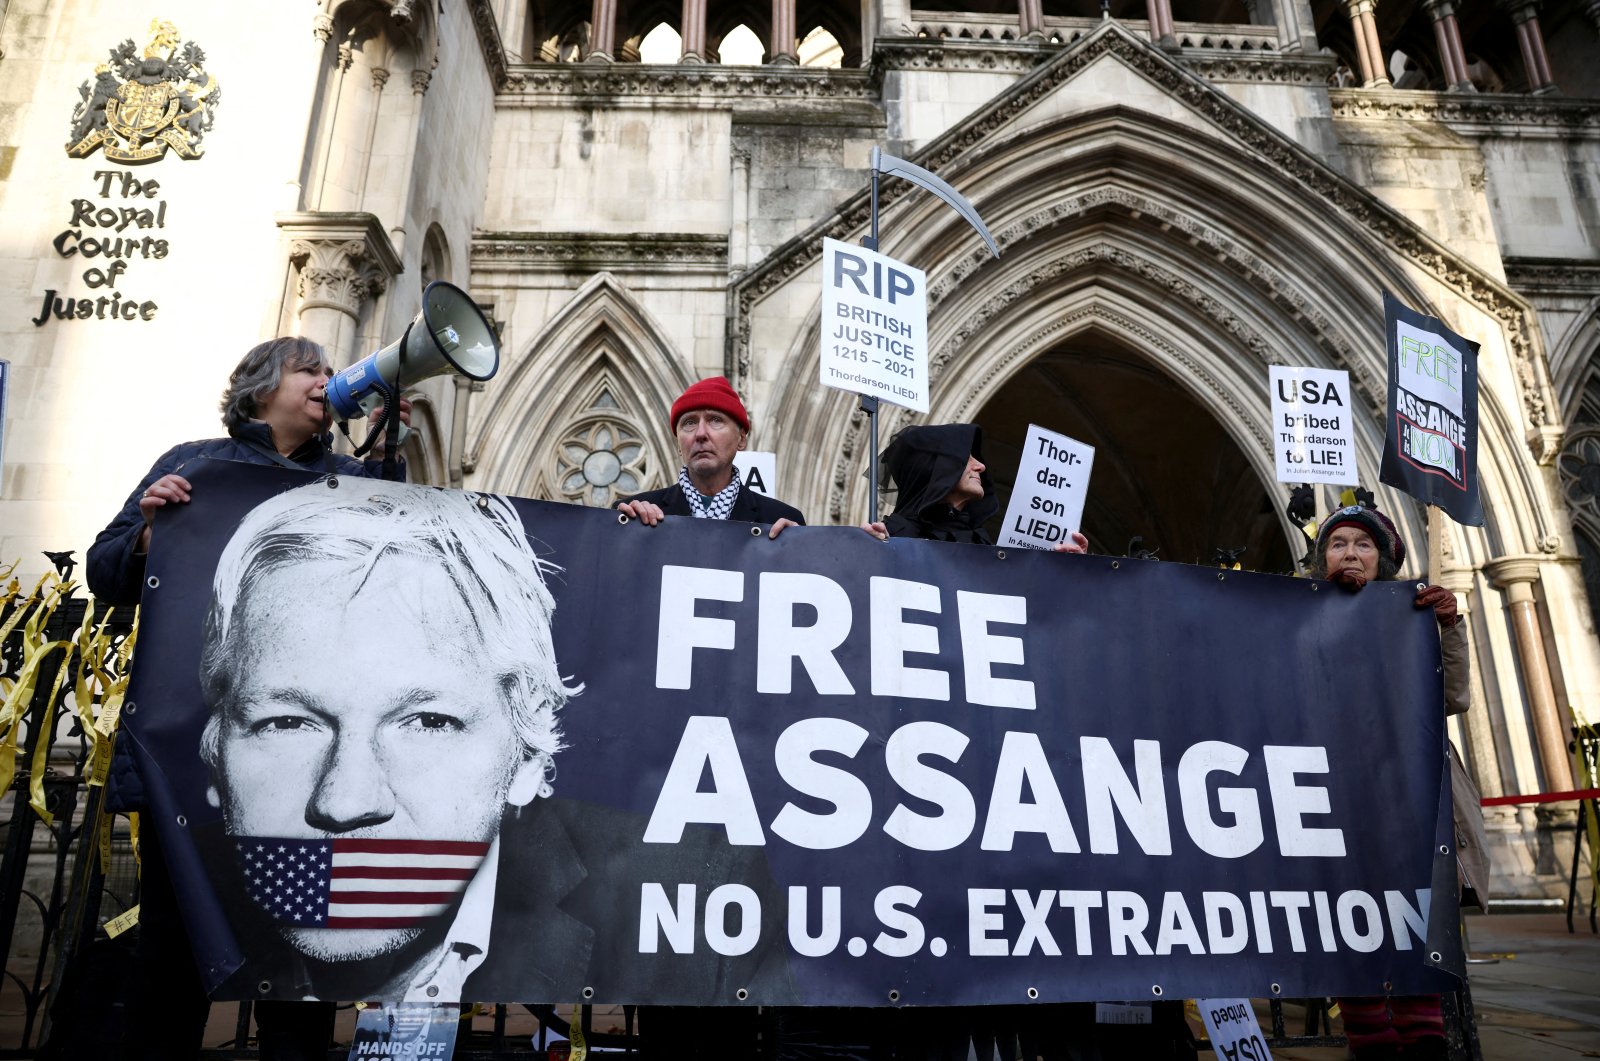 Supporters of Julian Assange display signs and a banner, outside the Royal Courts of Justice in London, Britain, Dec. 10, 2021. (Reuters Photo)